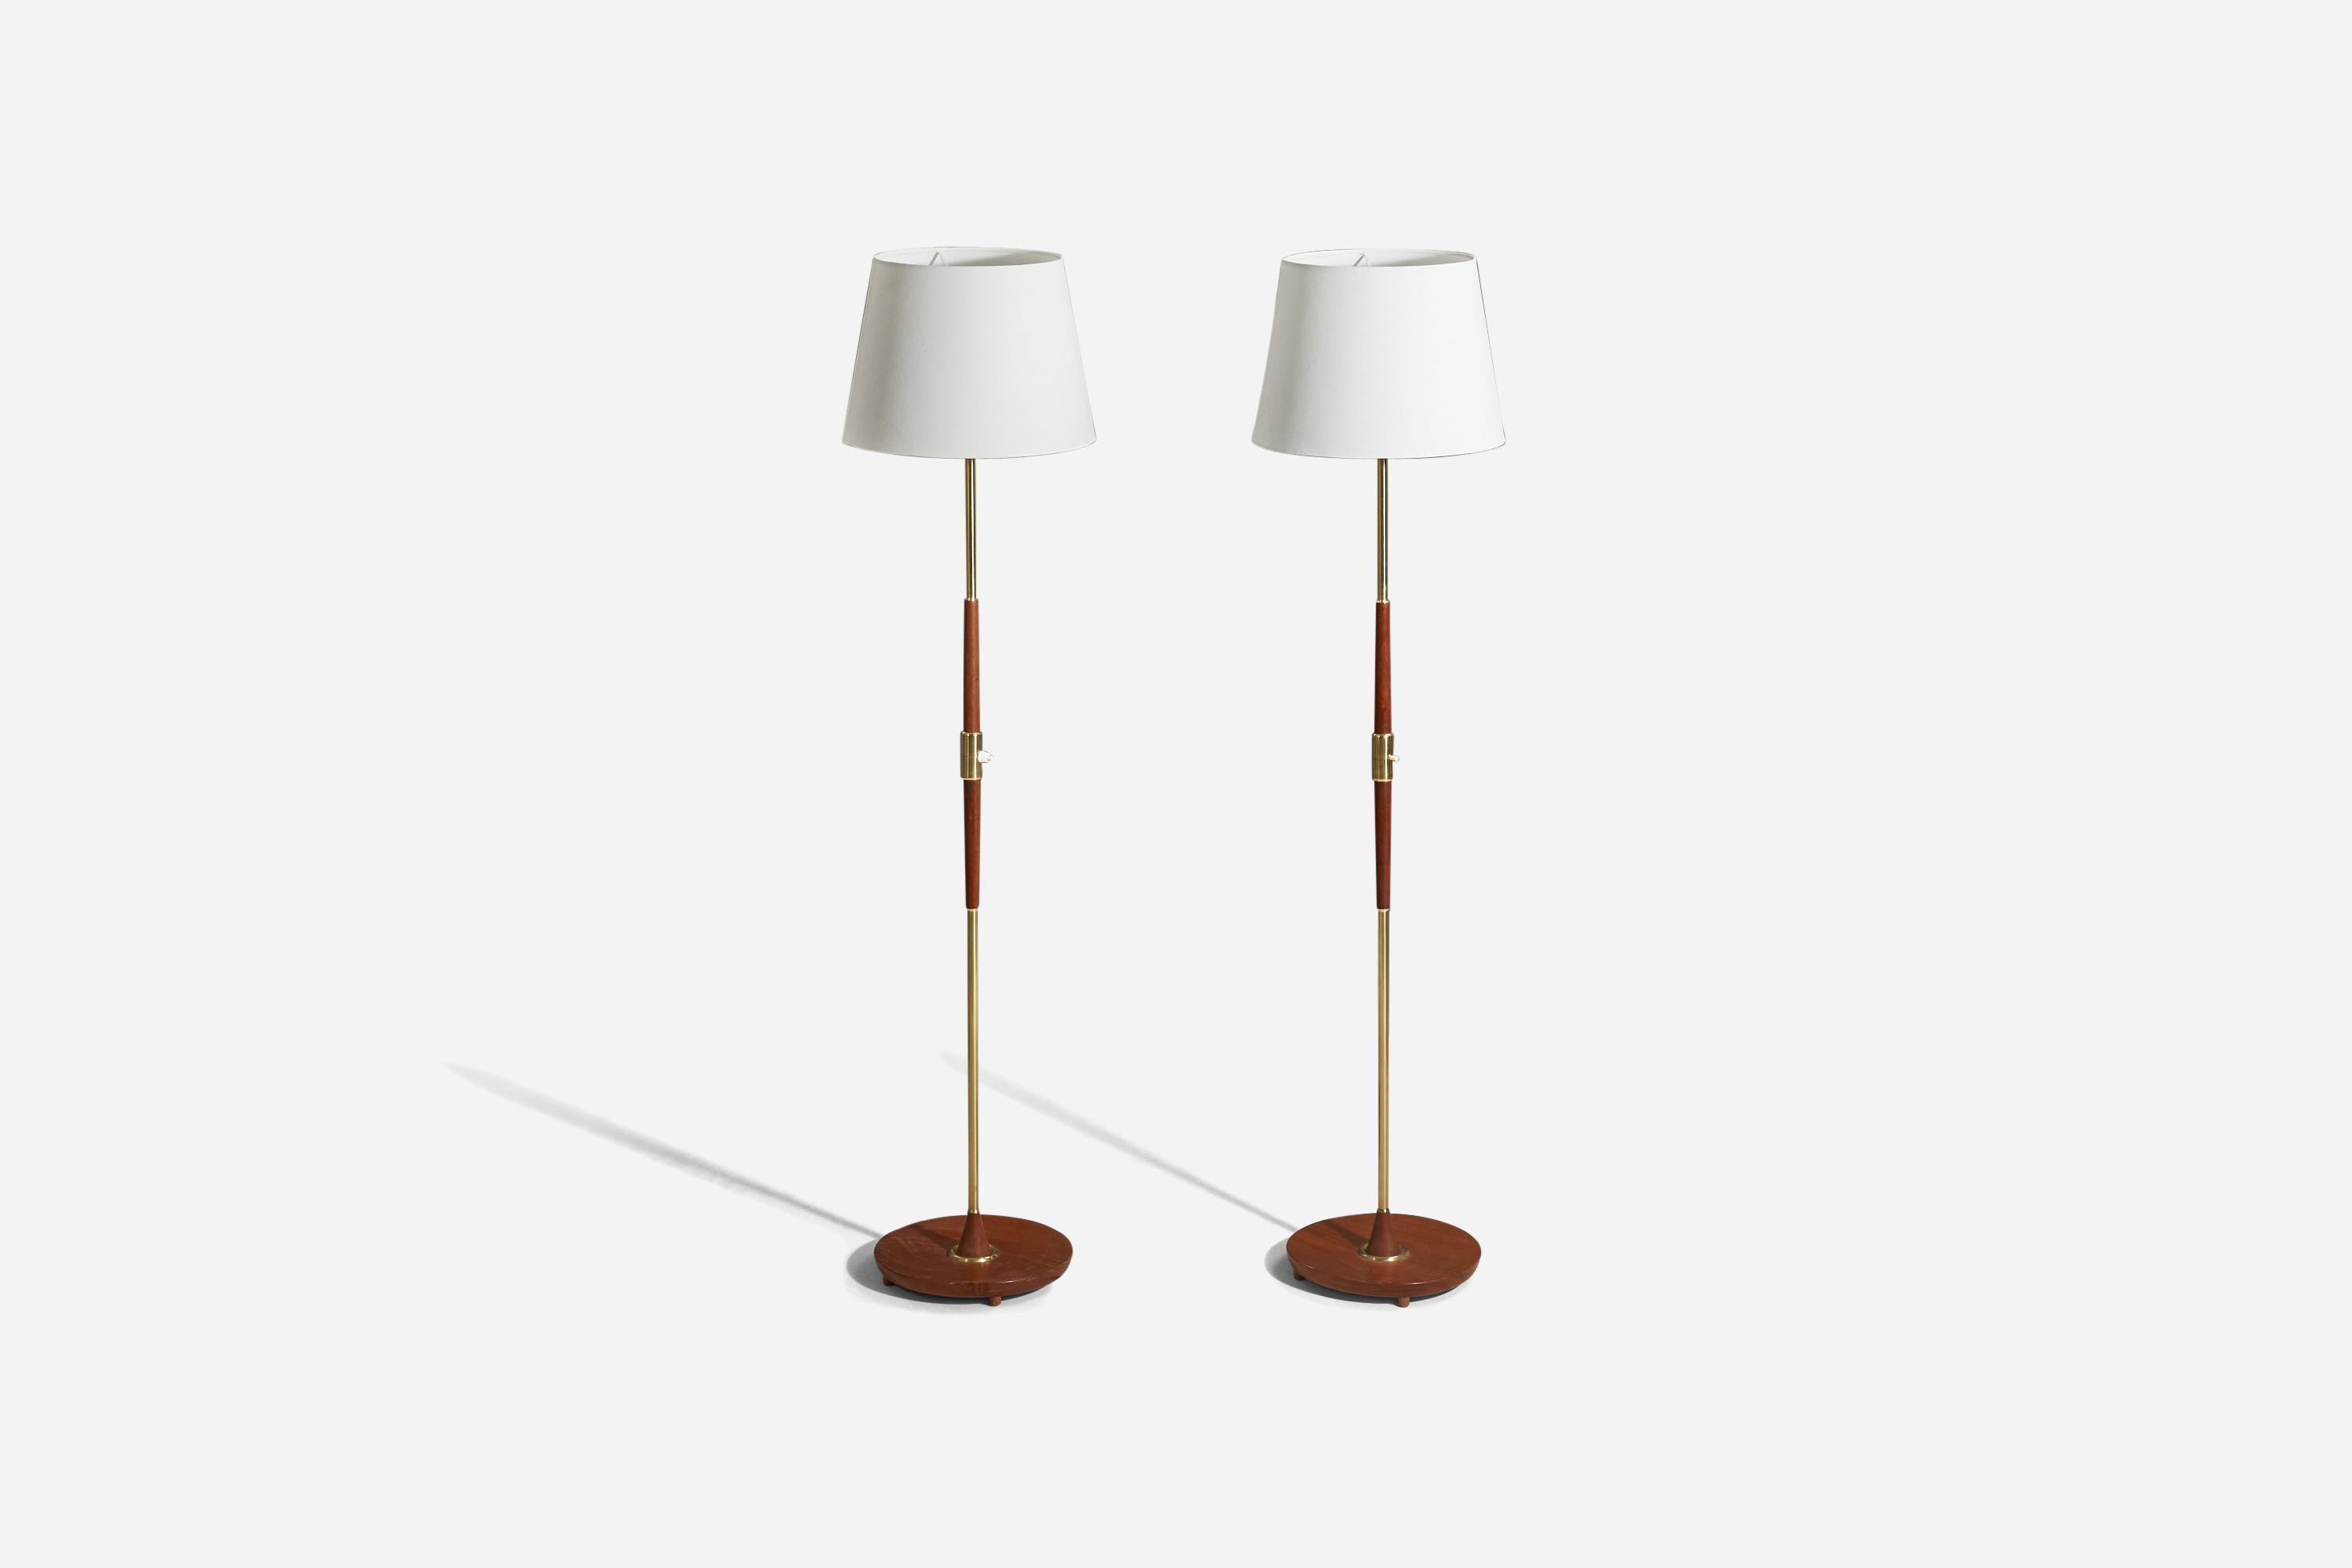 A wood, brass and fabric floor lamp designed and produced by MAE, Sweden, 1950s.

Sold with Lampshade(s). 
Stated dimensions refer to the Floor Lamp with the Shade(s). 

Socket takes standard E-26 medium base bulb.
There is no maximum wattage stated